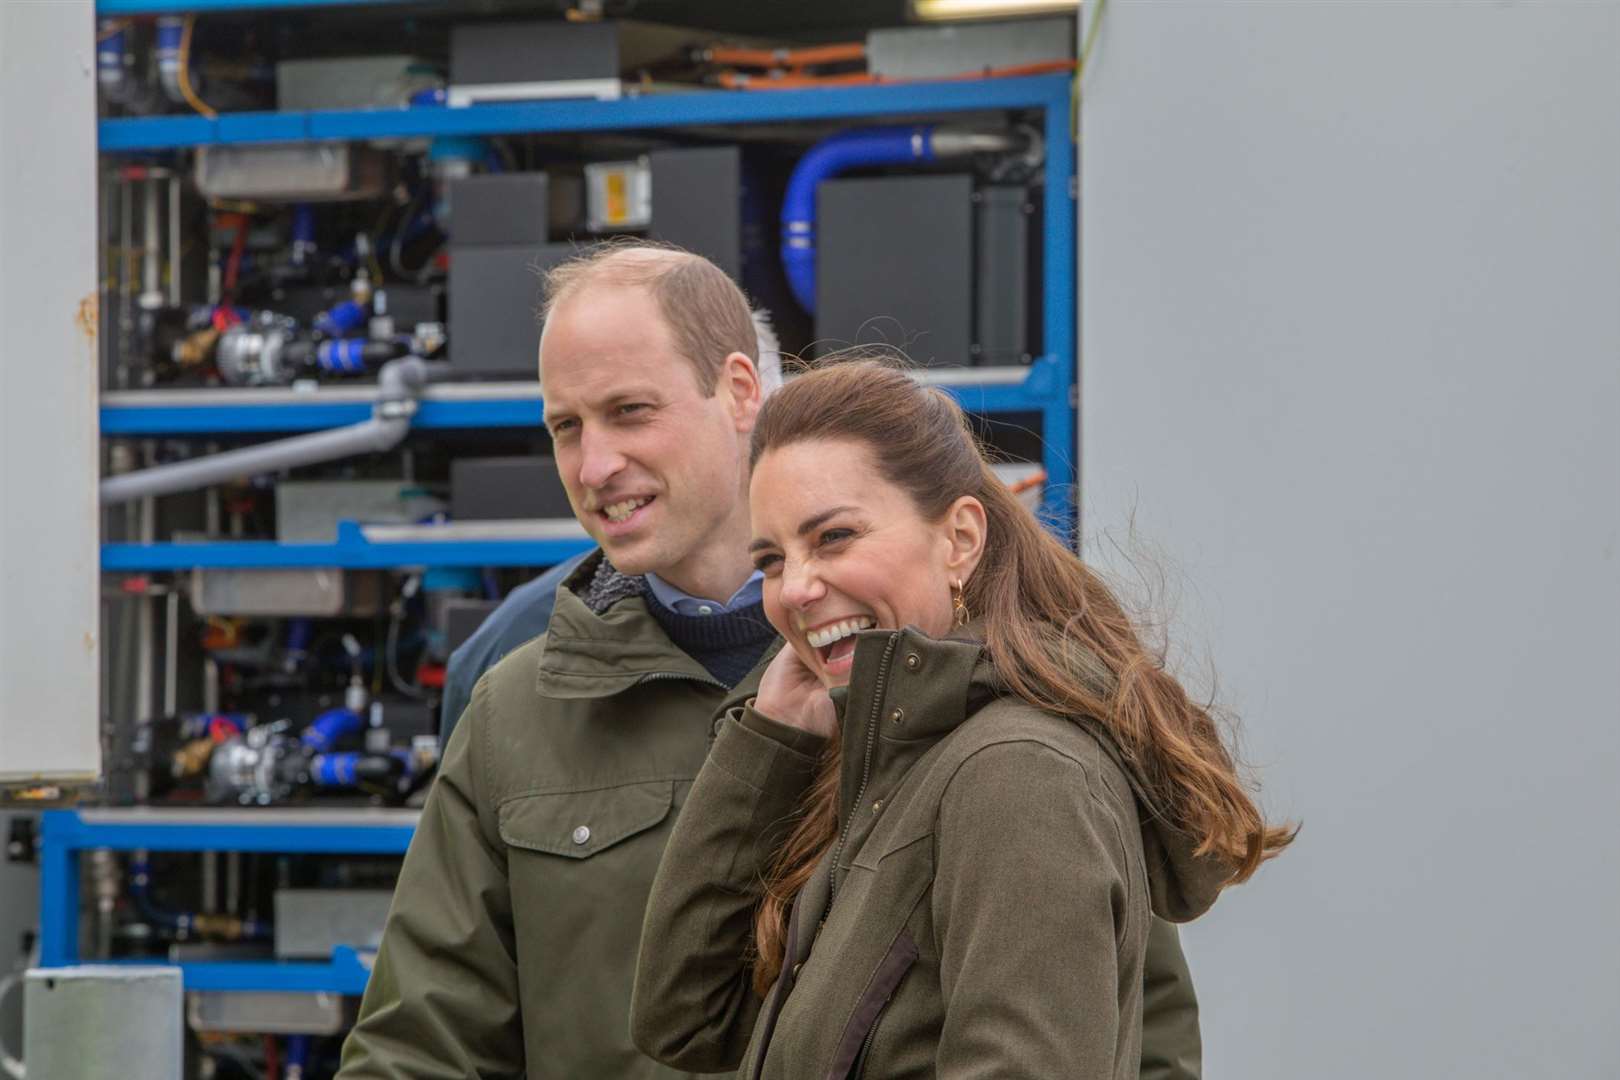 The Duke and Duchess at the EMEC hydrogen fuel cell.